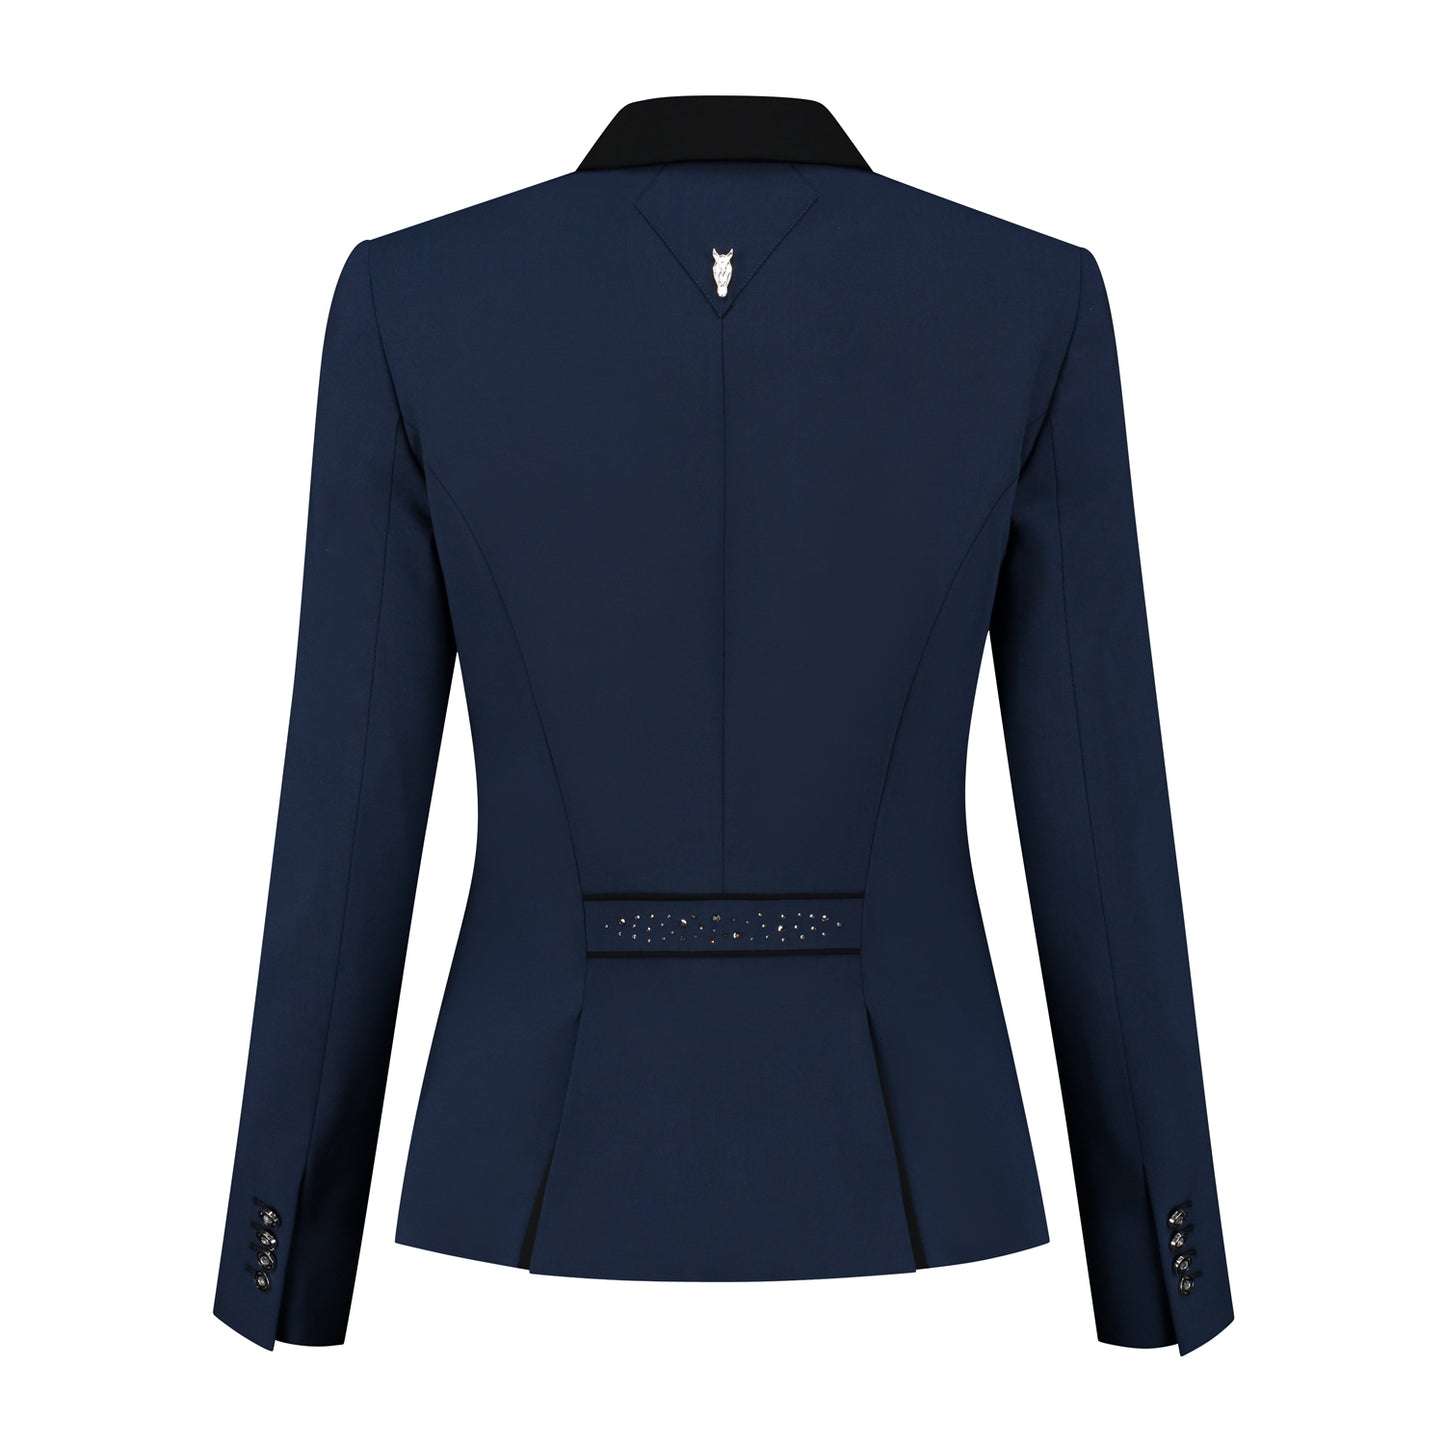 Competition jacket - Royal blue